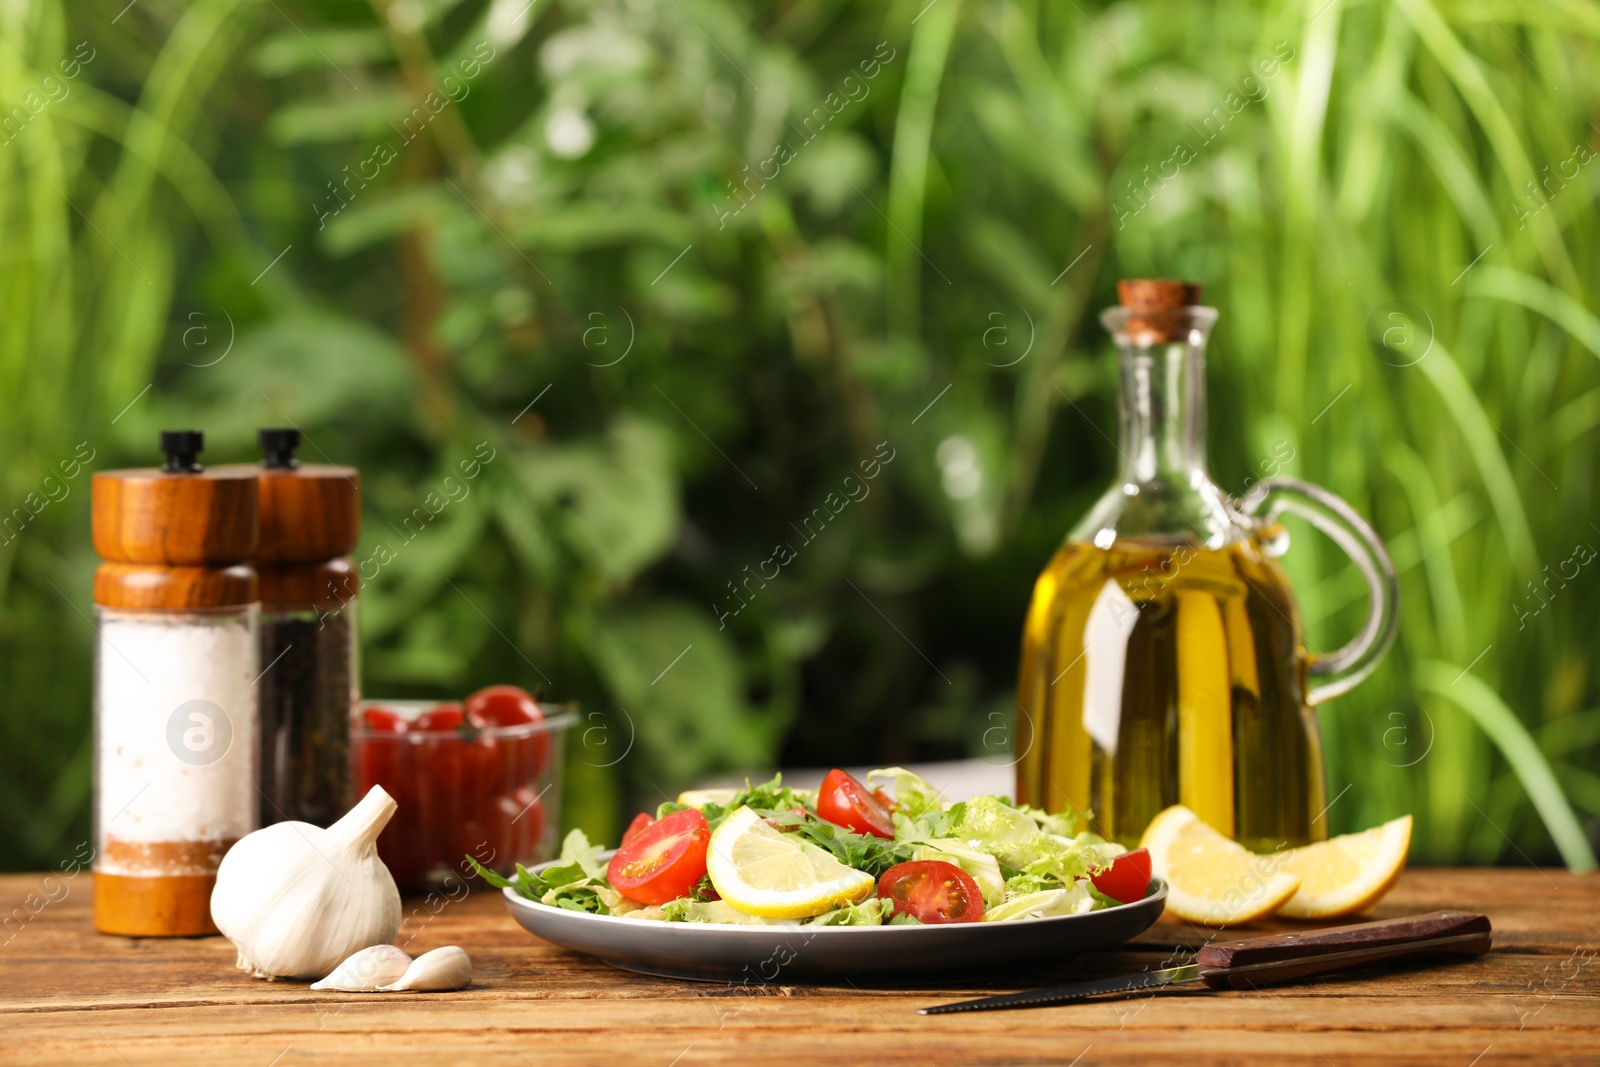 Photo of Bottle with cooking oil and delicious salad on wooden table against blurred background